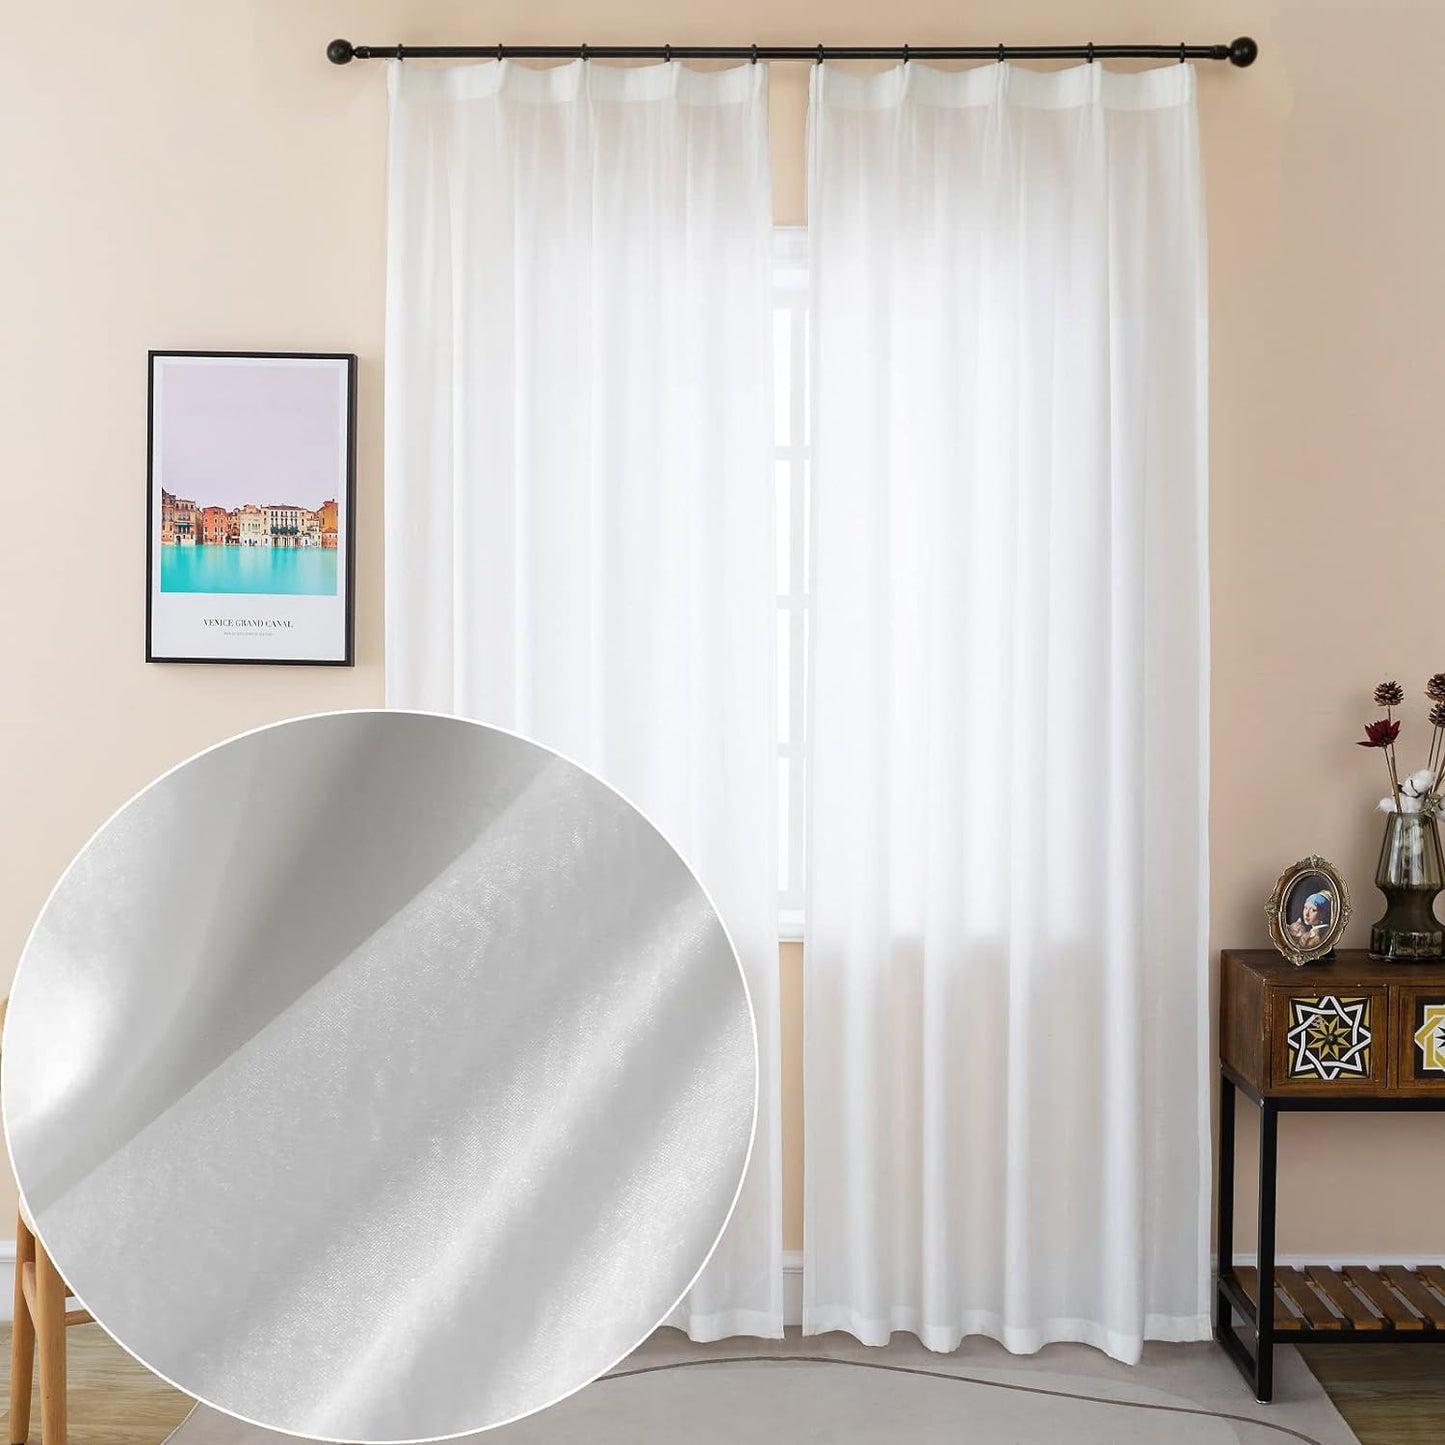 Ftinala White Curtains 84 Inches Long Light Filtering Curtains 2 Panels Pinch Pleat Curtains & Drapes Thin Velvet Textured Curtains Shiny Living Room Divider Curtains Privacy Window Curtains  Ftinala   